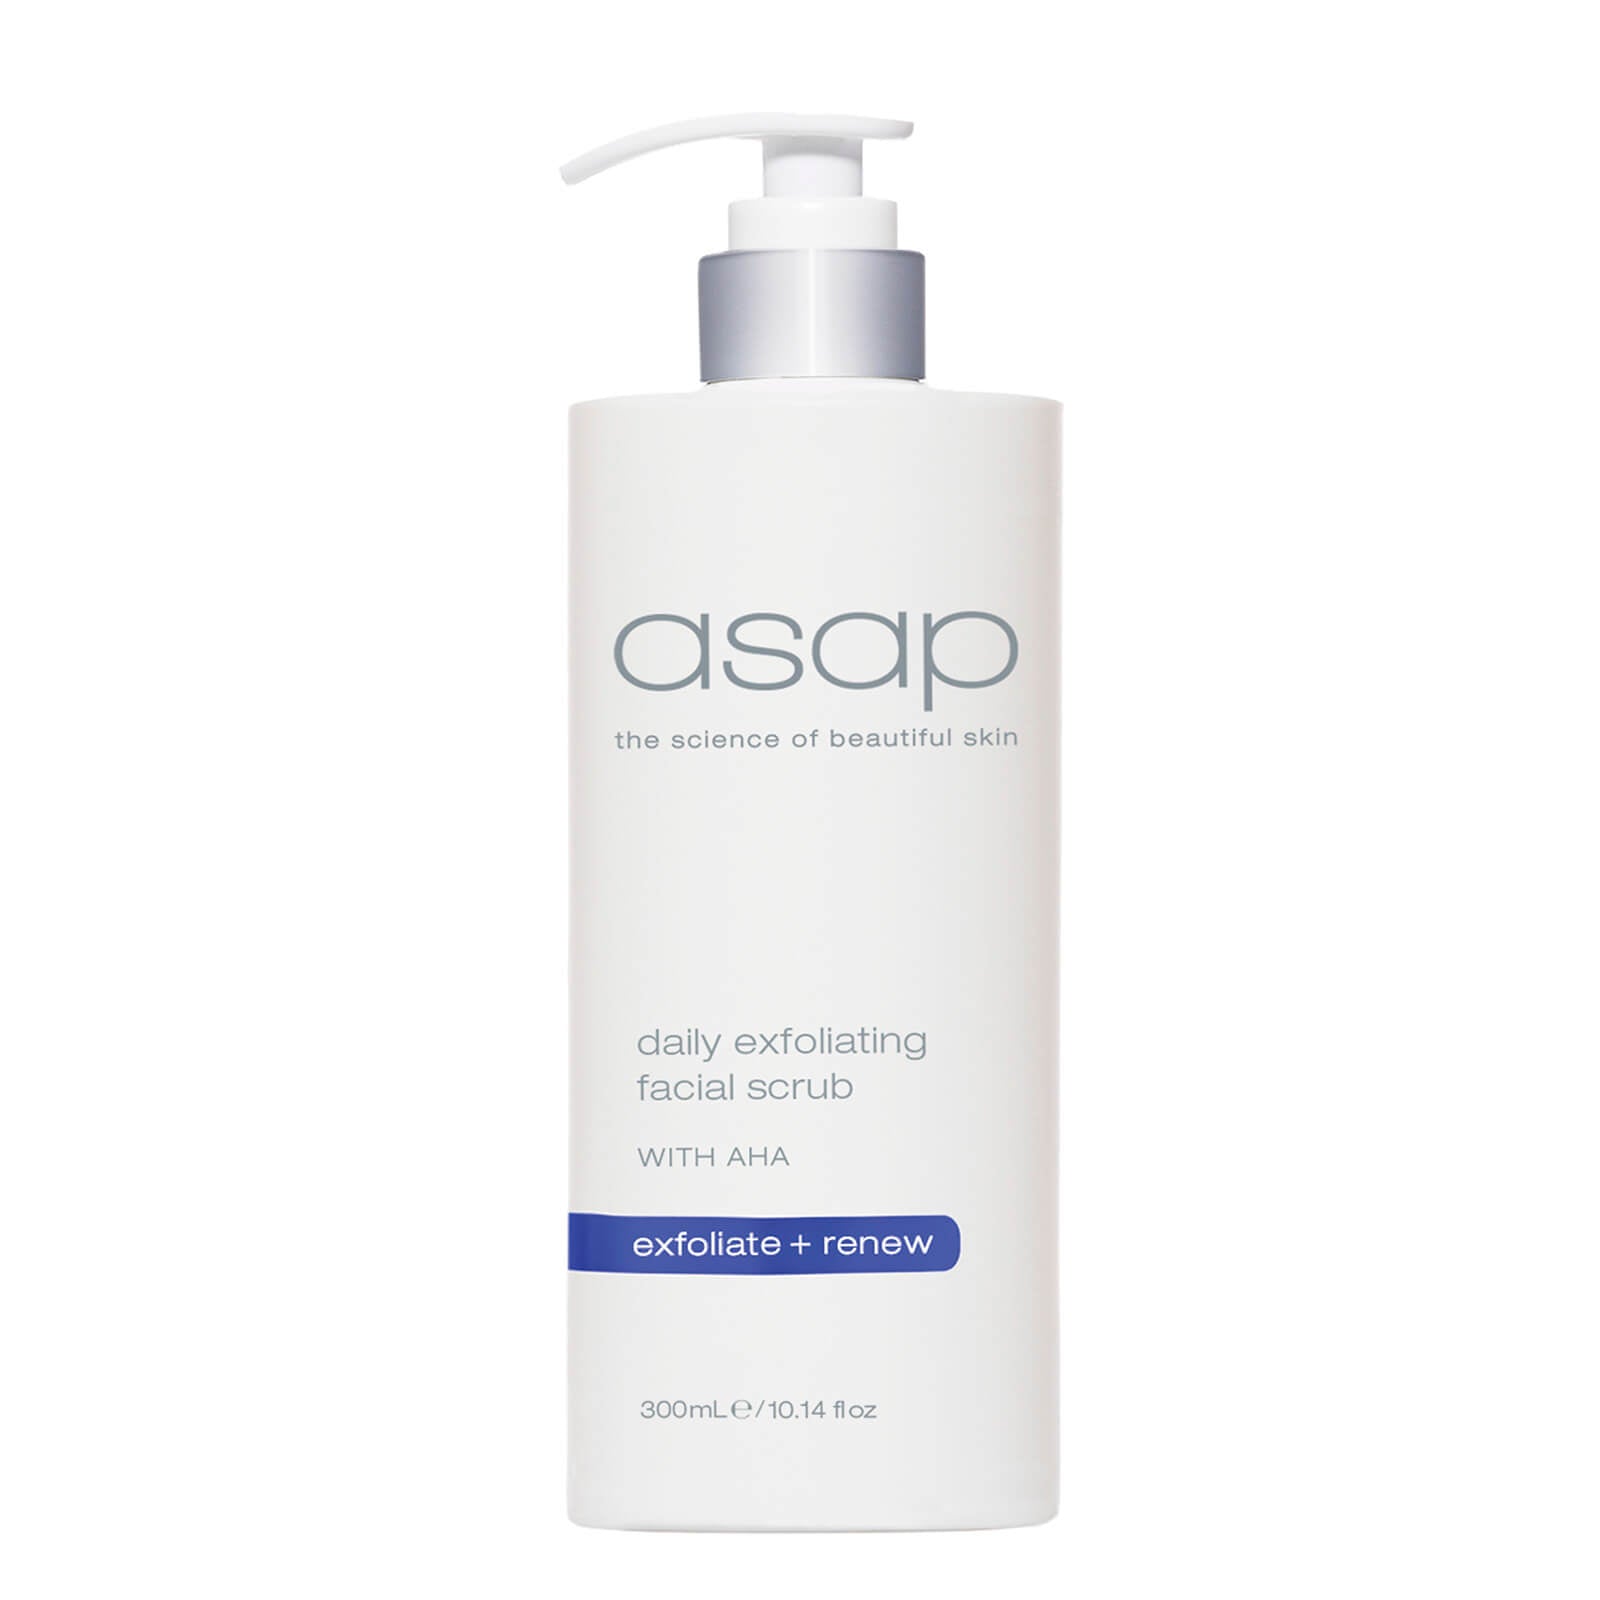 ASAP Daily Facial Scrub 300ml LIMITED EDITION - Exquisite Laser Clinic